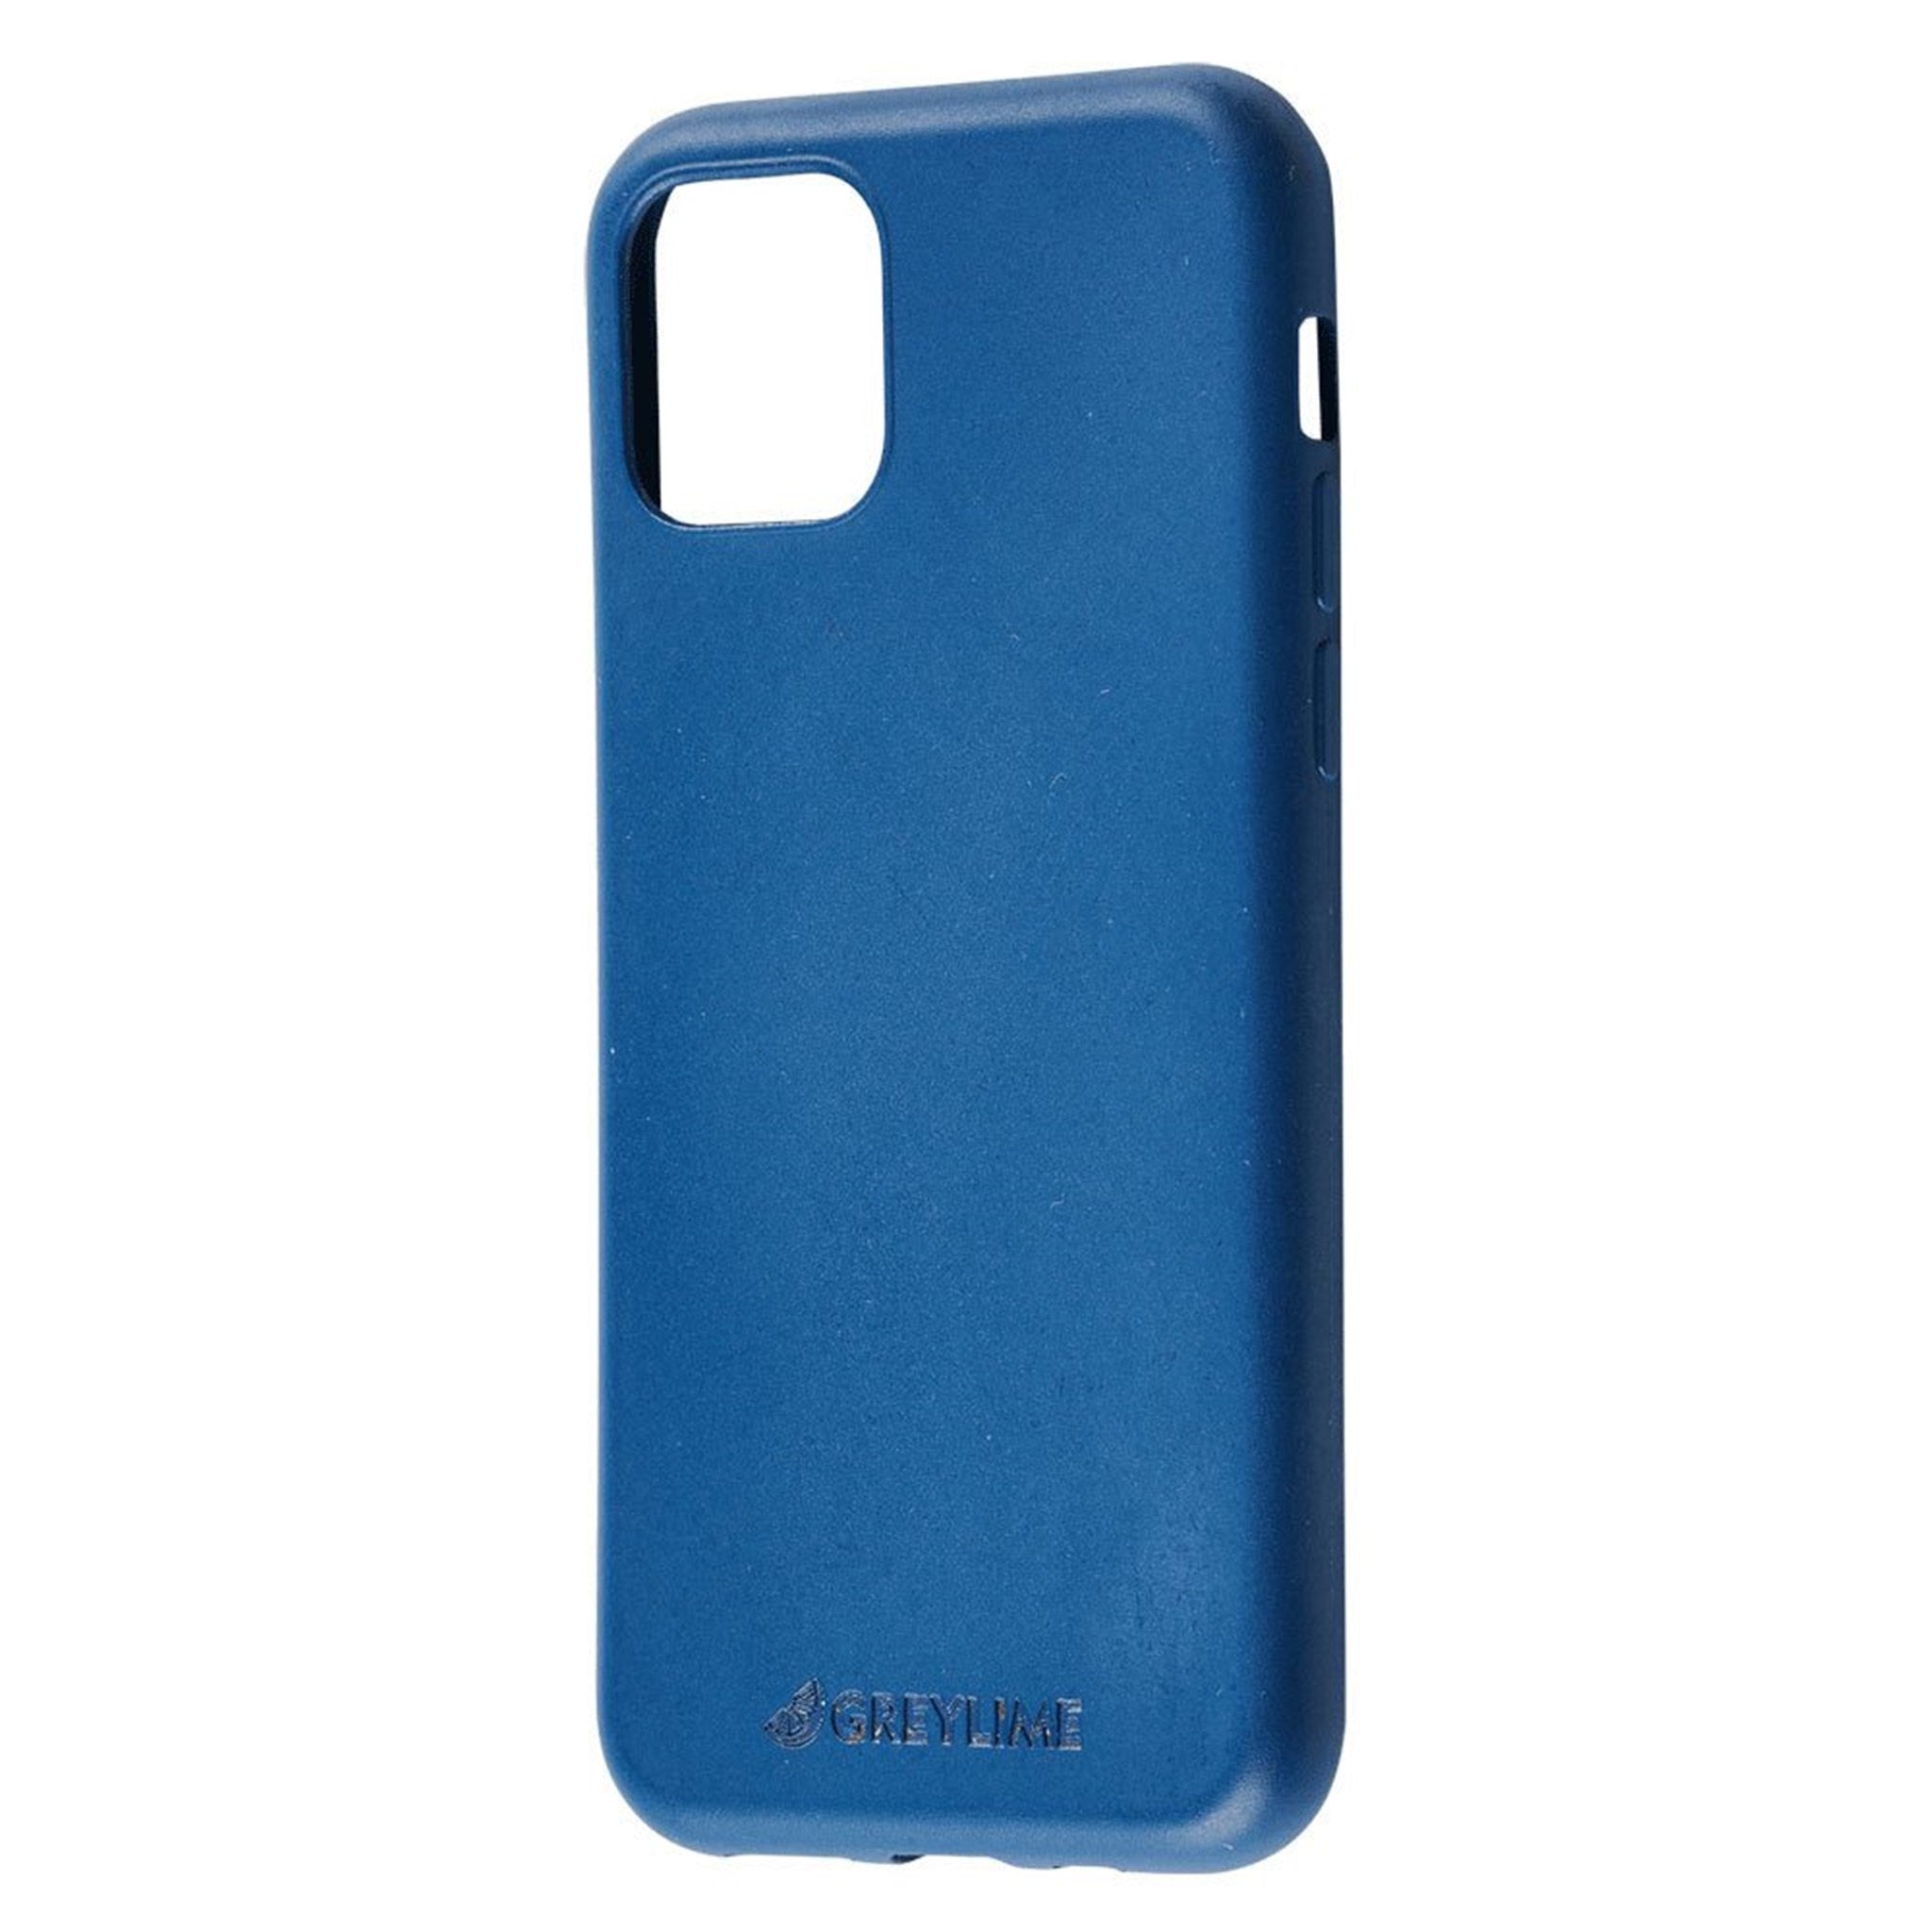 GreyLime-iPhone-11-Pro-biodegradable-cover-Navy-blue-COIP11P03-V2.jpg